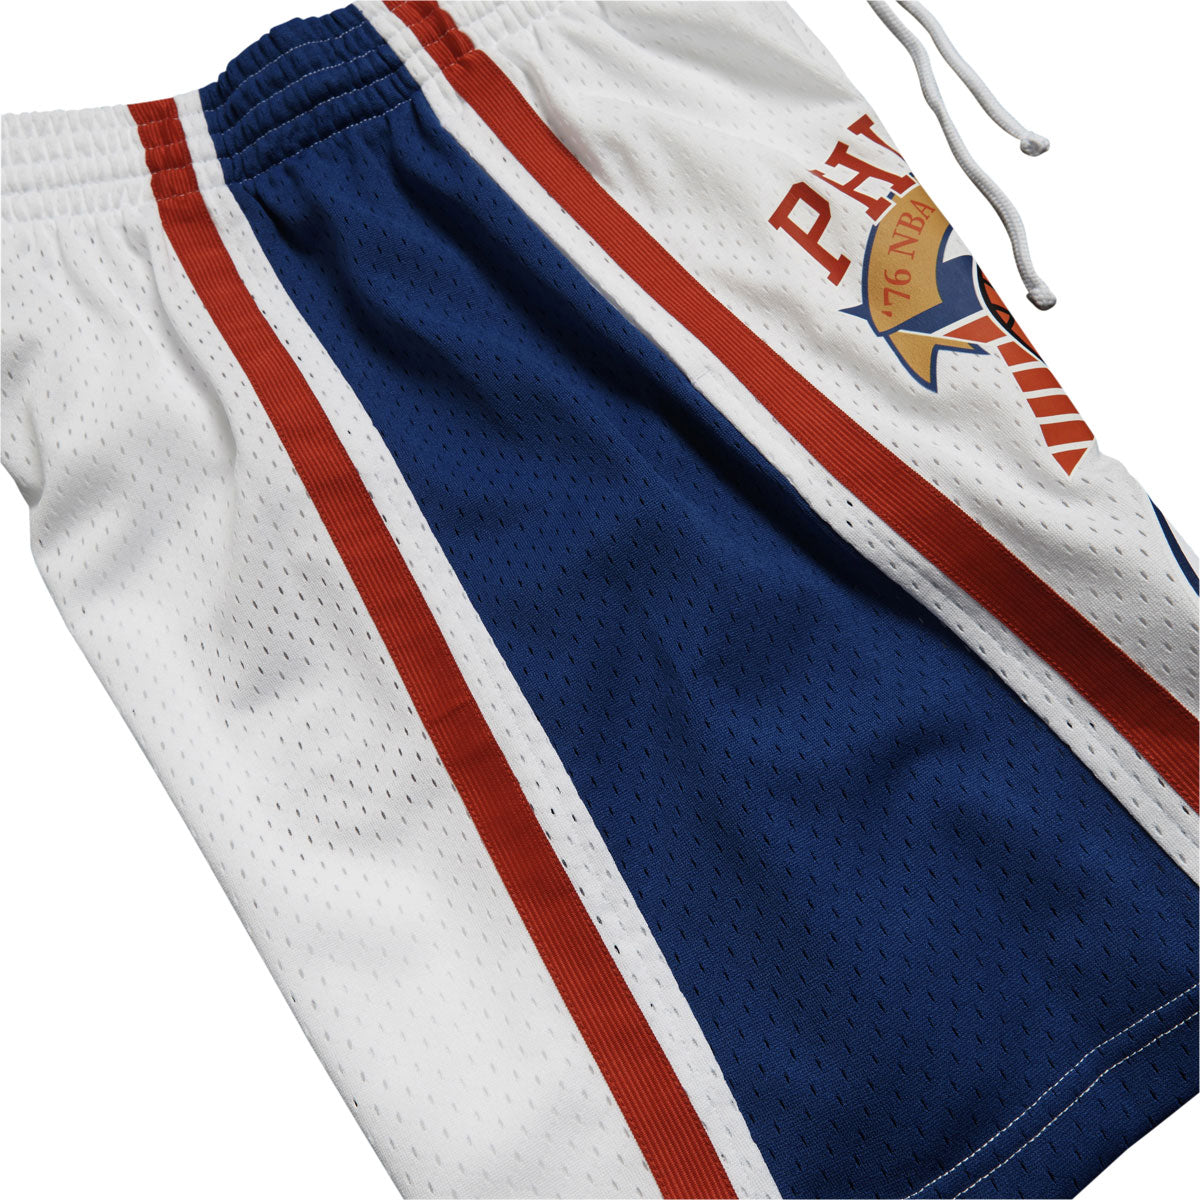 Mitchell & Ness x NBA Asg Patches 76ers Shorts - White image 3